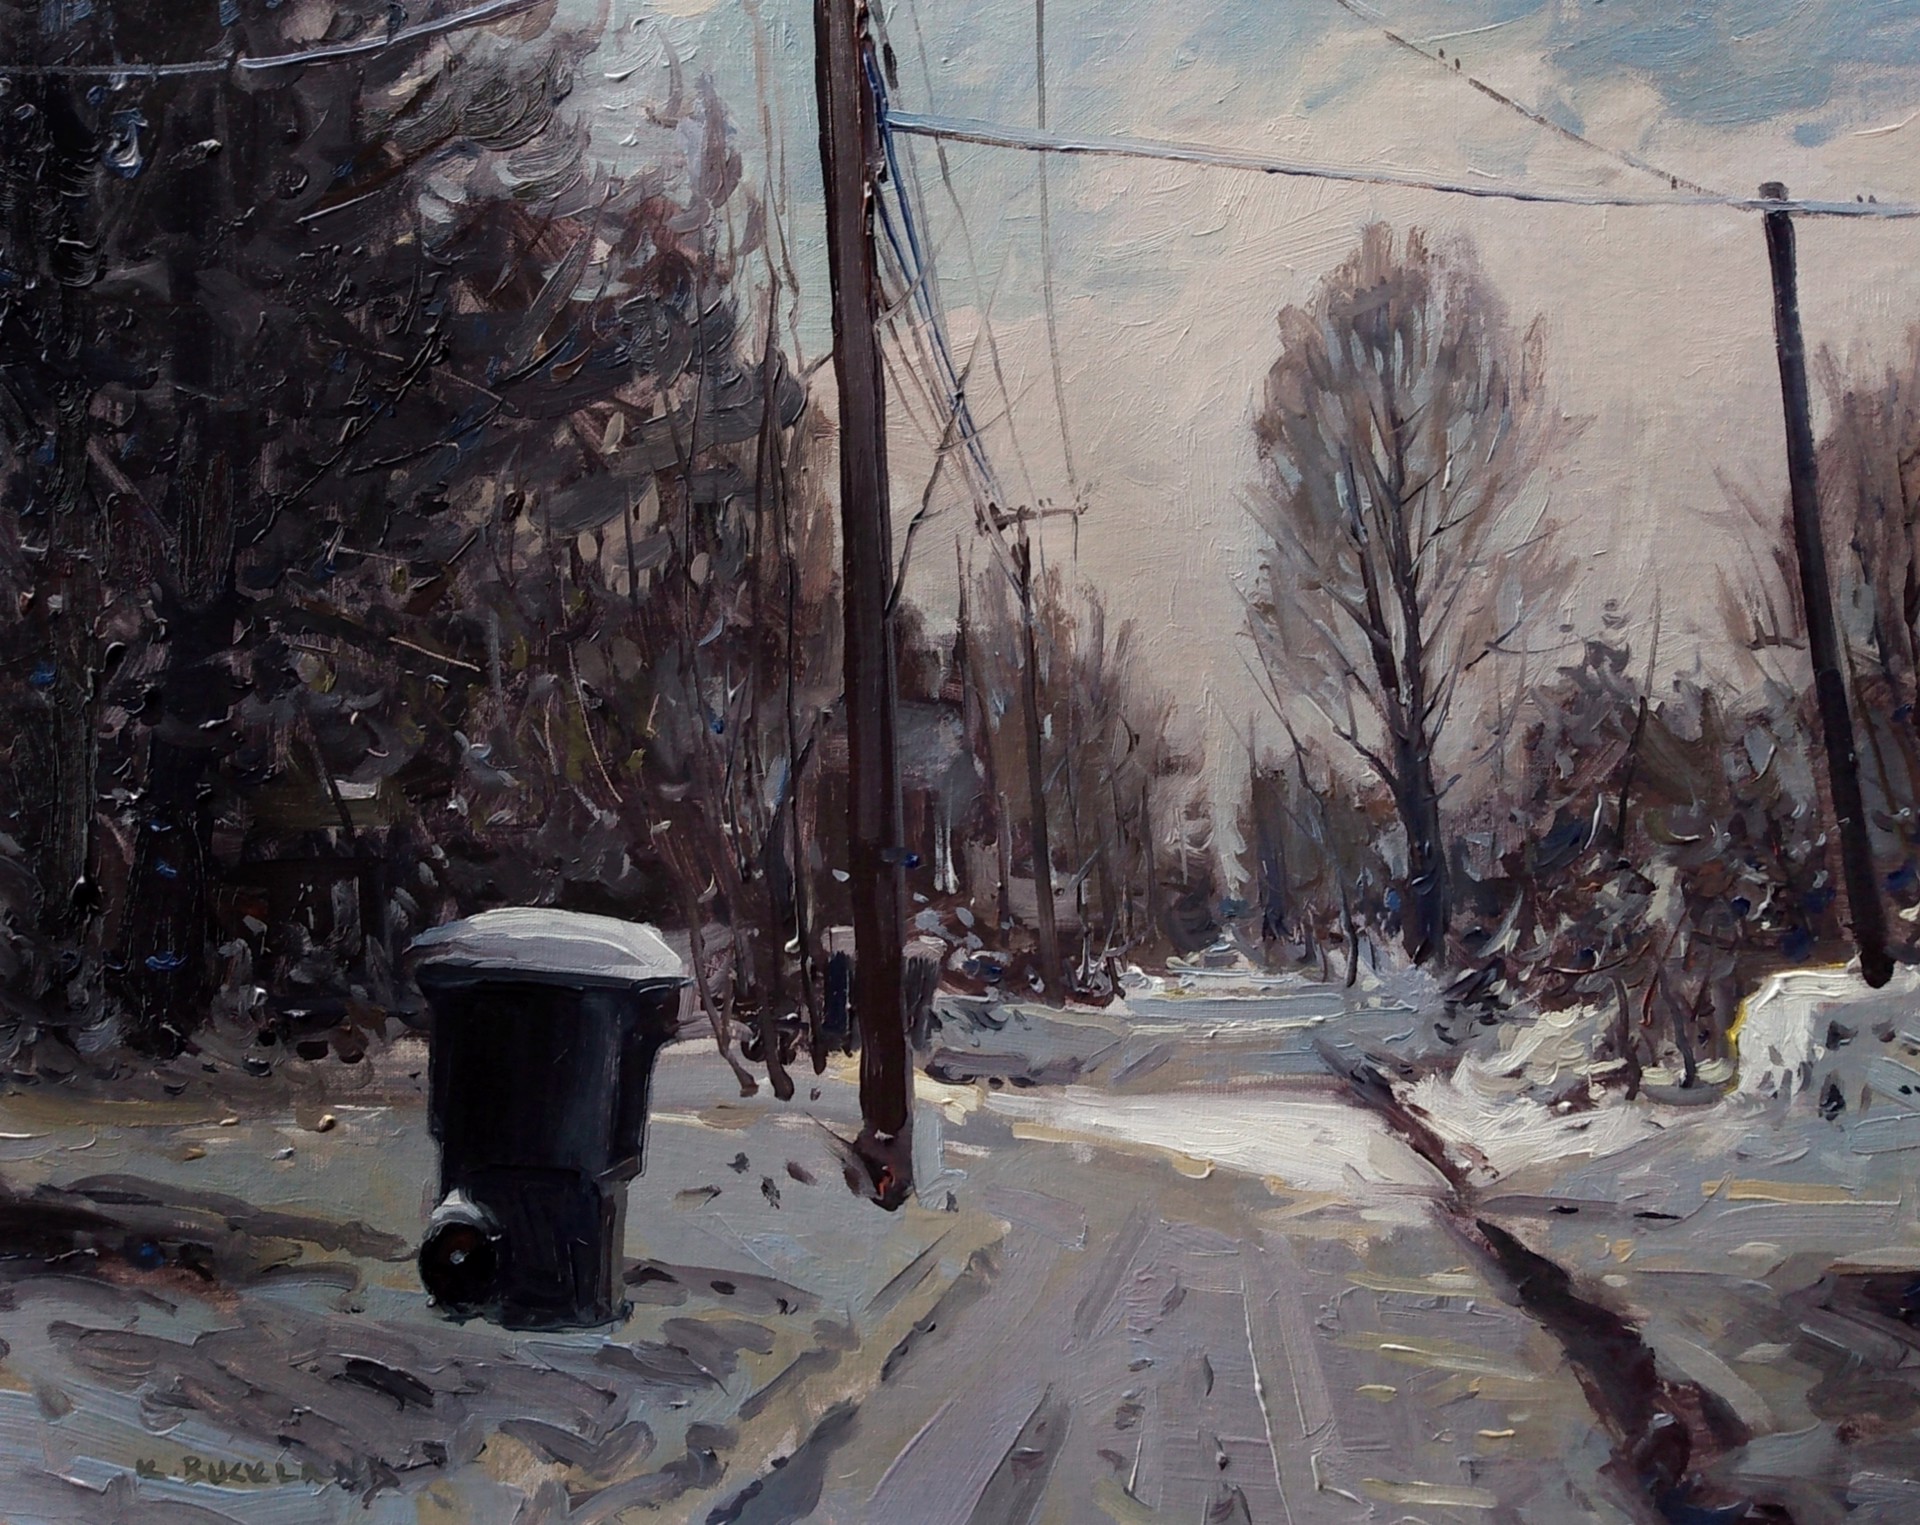 "Snow in the Alley" original oil painting by Kyle Buckland